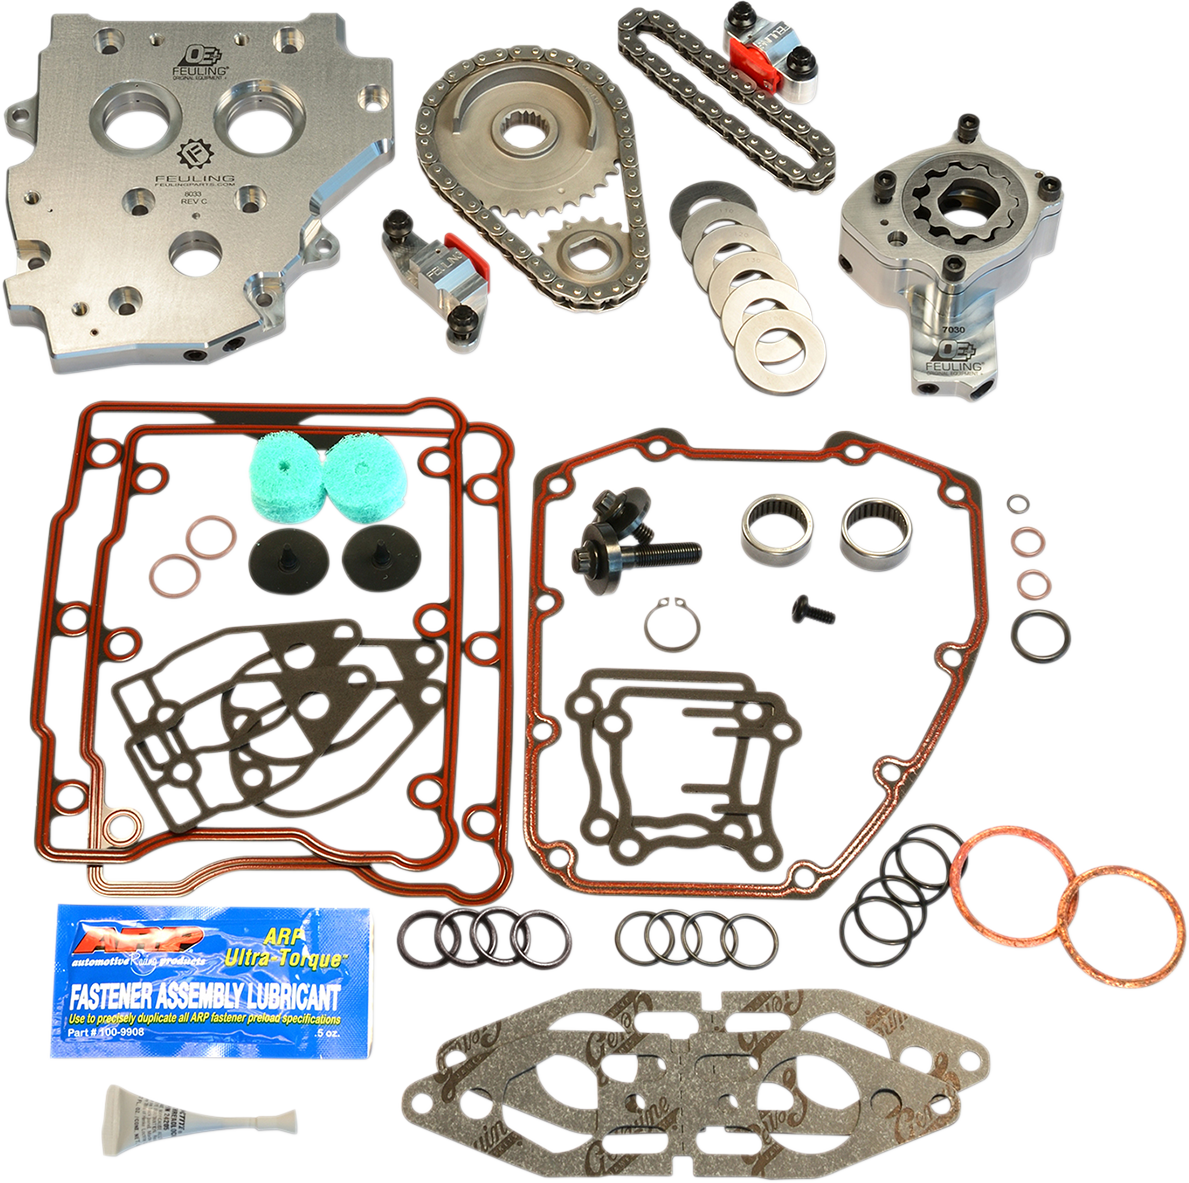 Feuling Hydraulic Cam Chain Tensioner Conversion Kit 1999-2000 Harley Touring